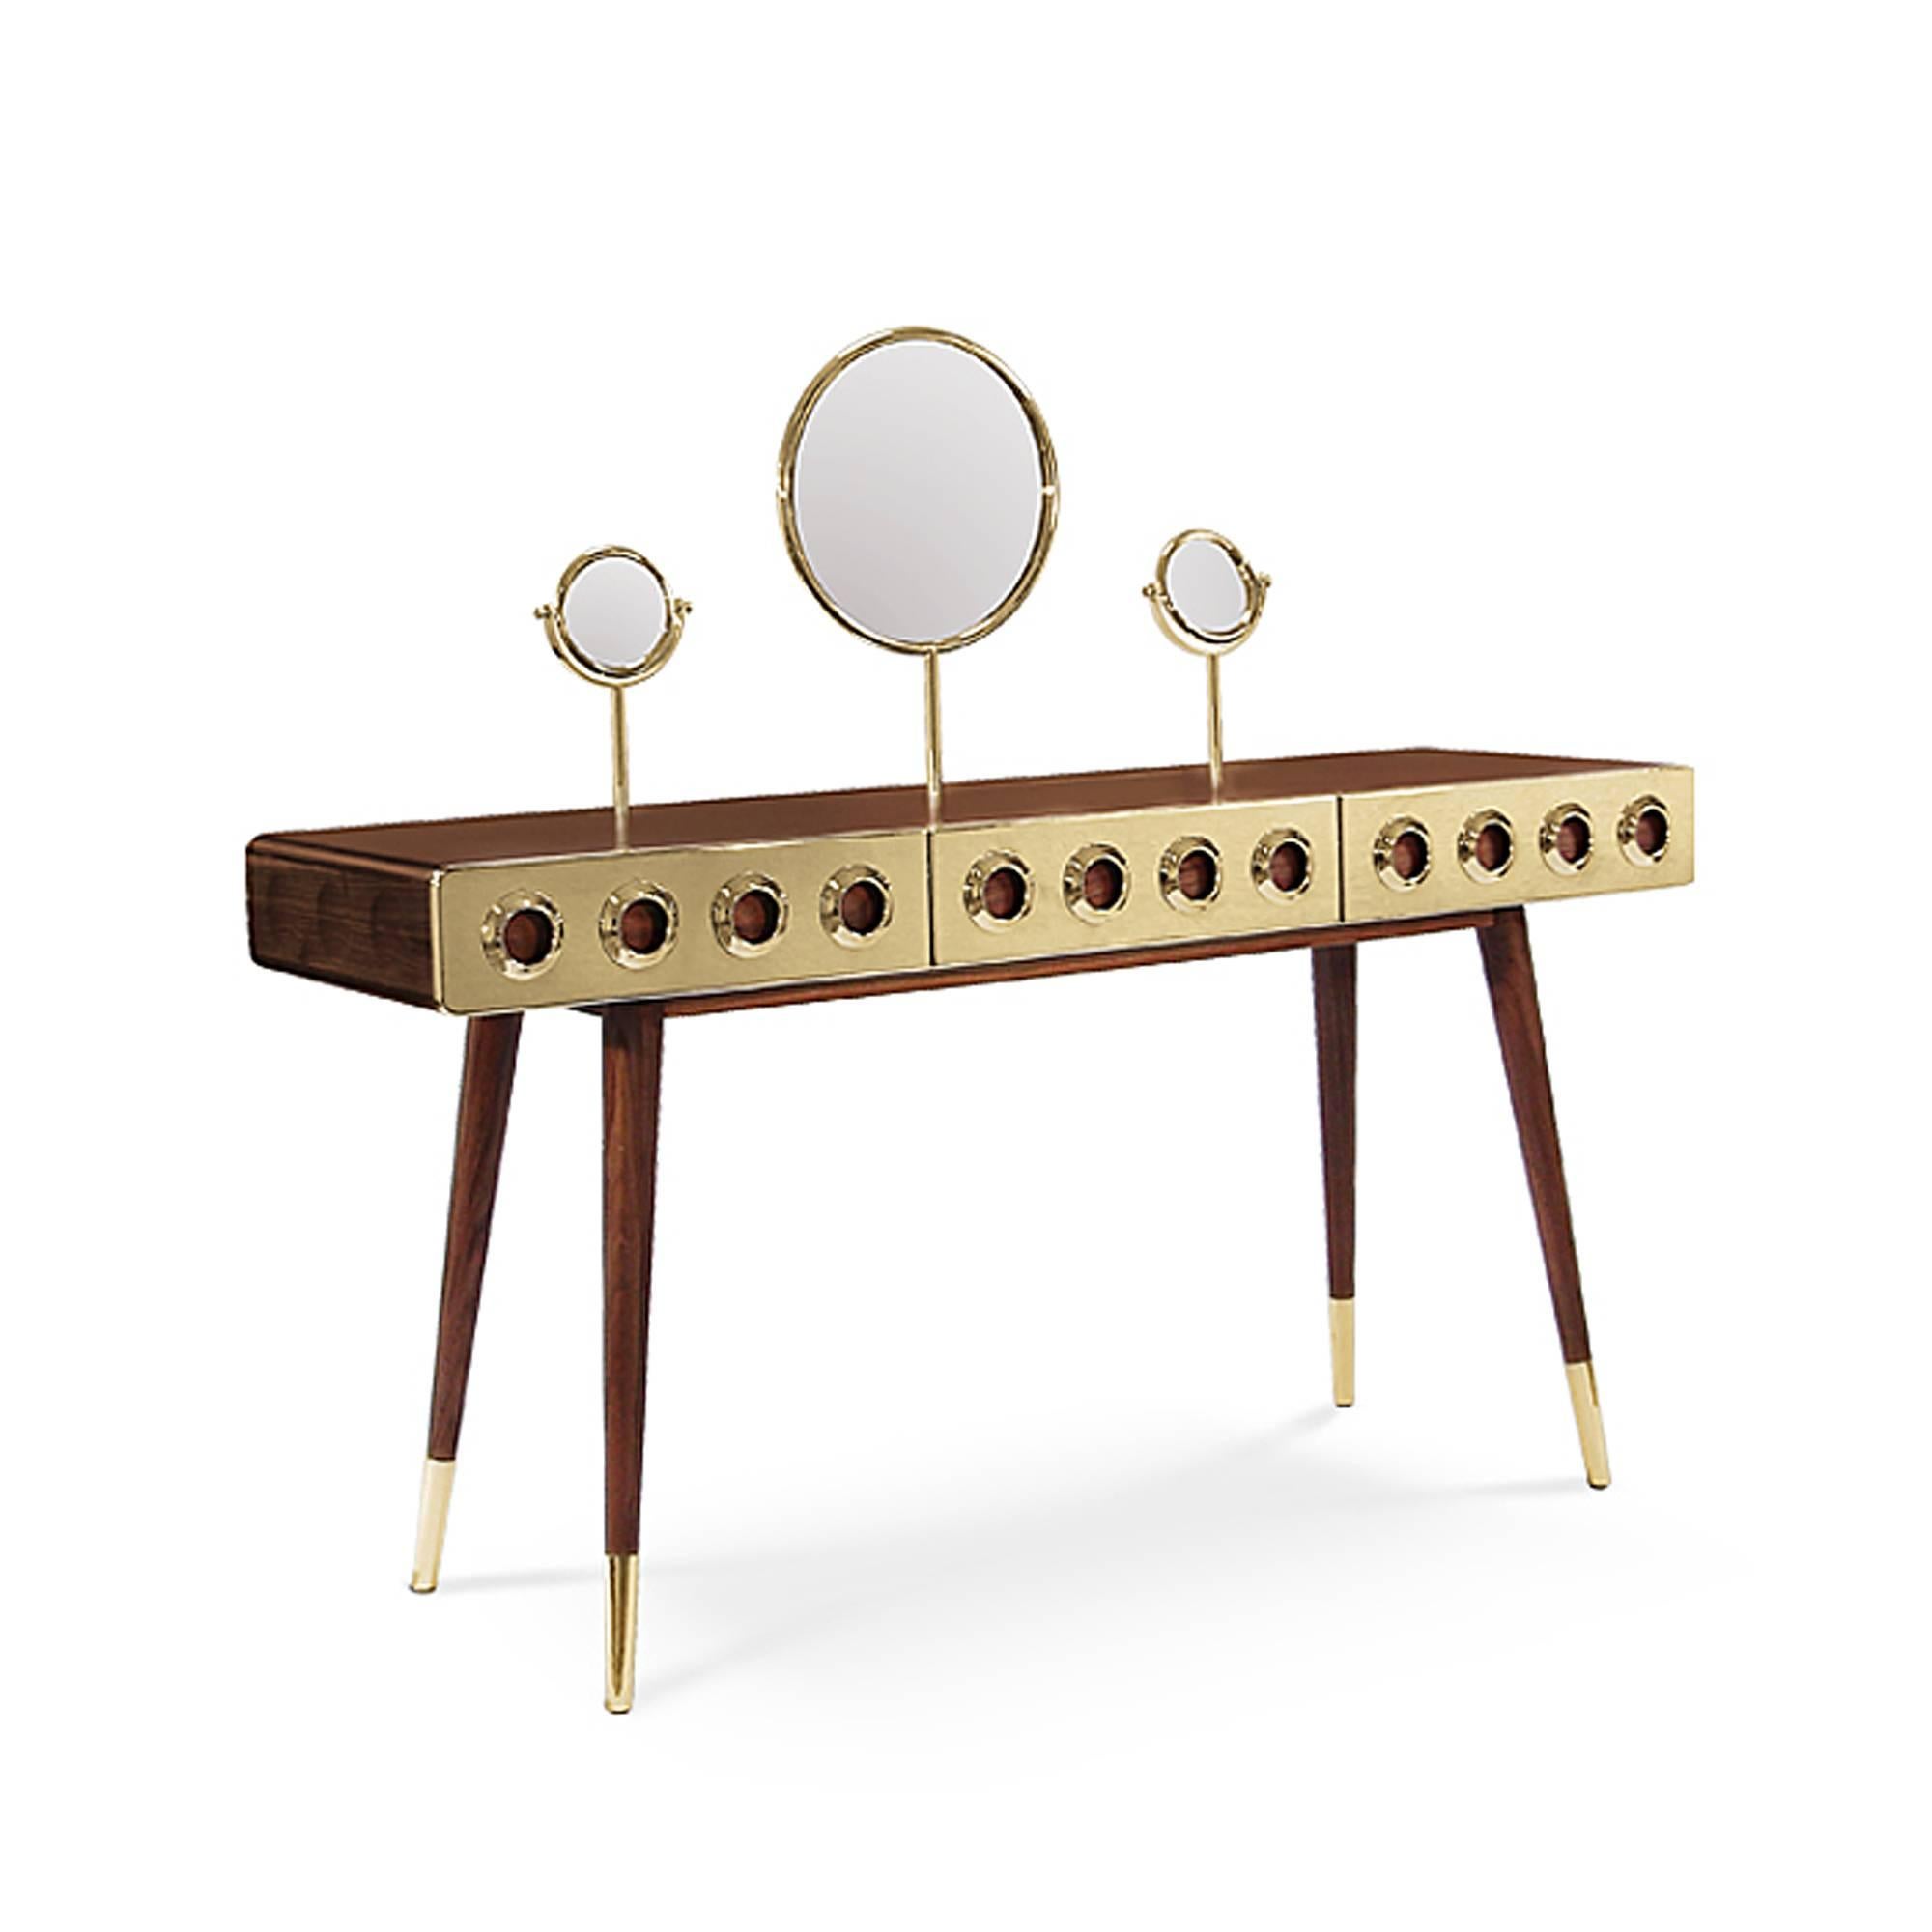 Desk golden with three drawers, in solid walnut wood,
mirrors and polished brass UV-resistant clear.
